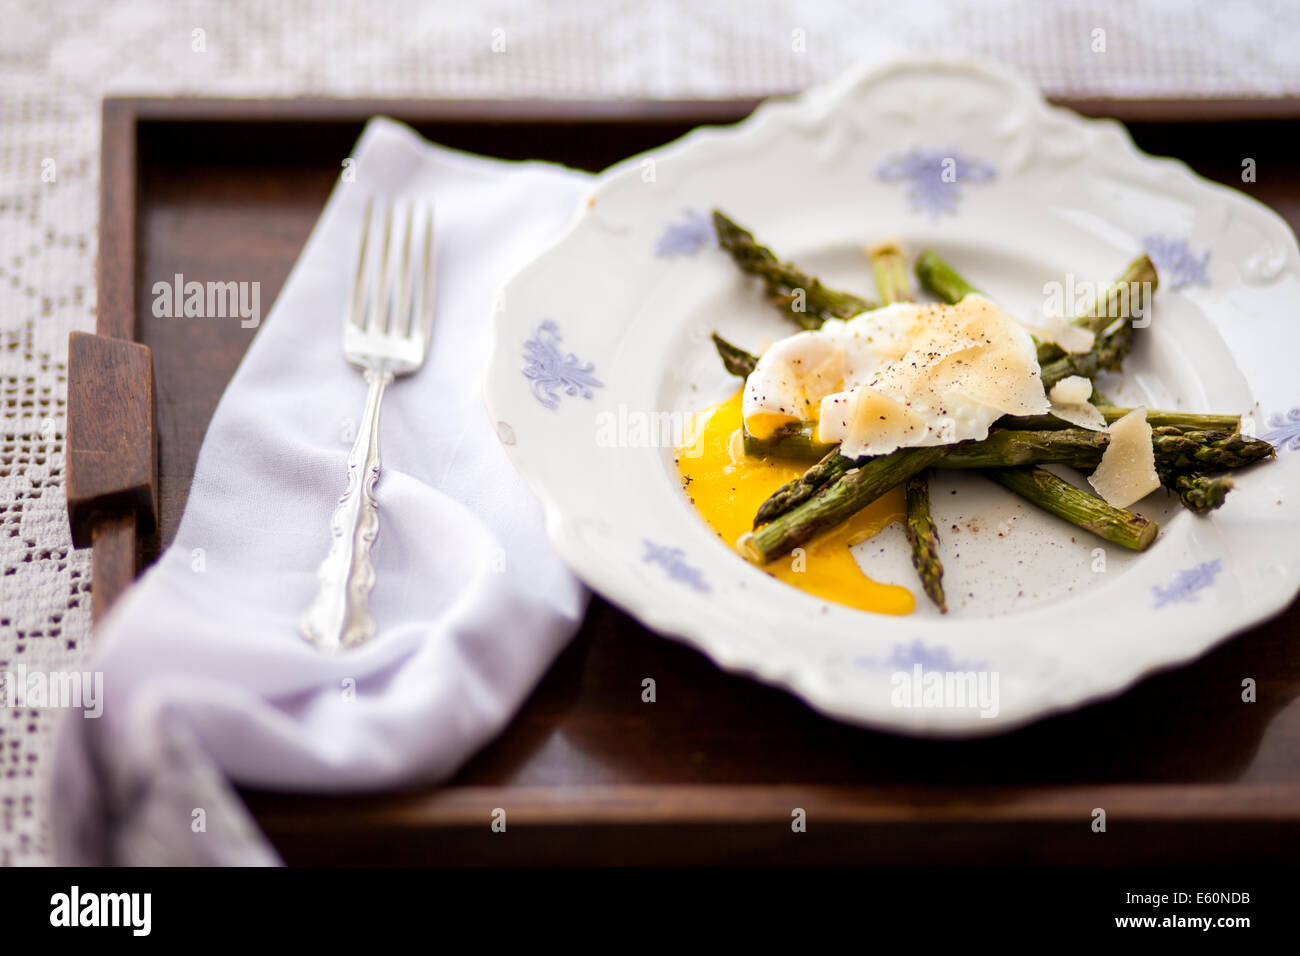 plate of poached egg on asparagus Stock Photo